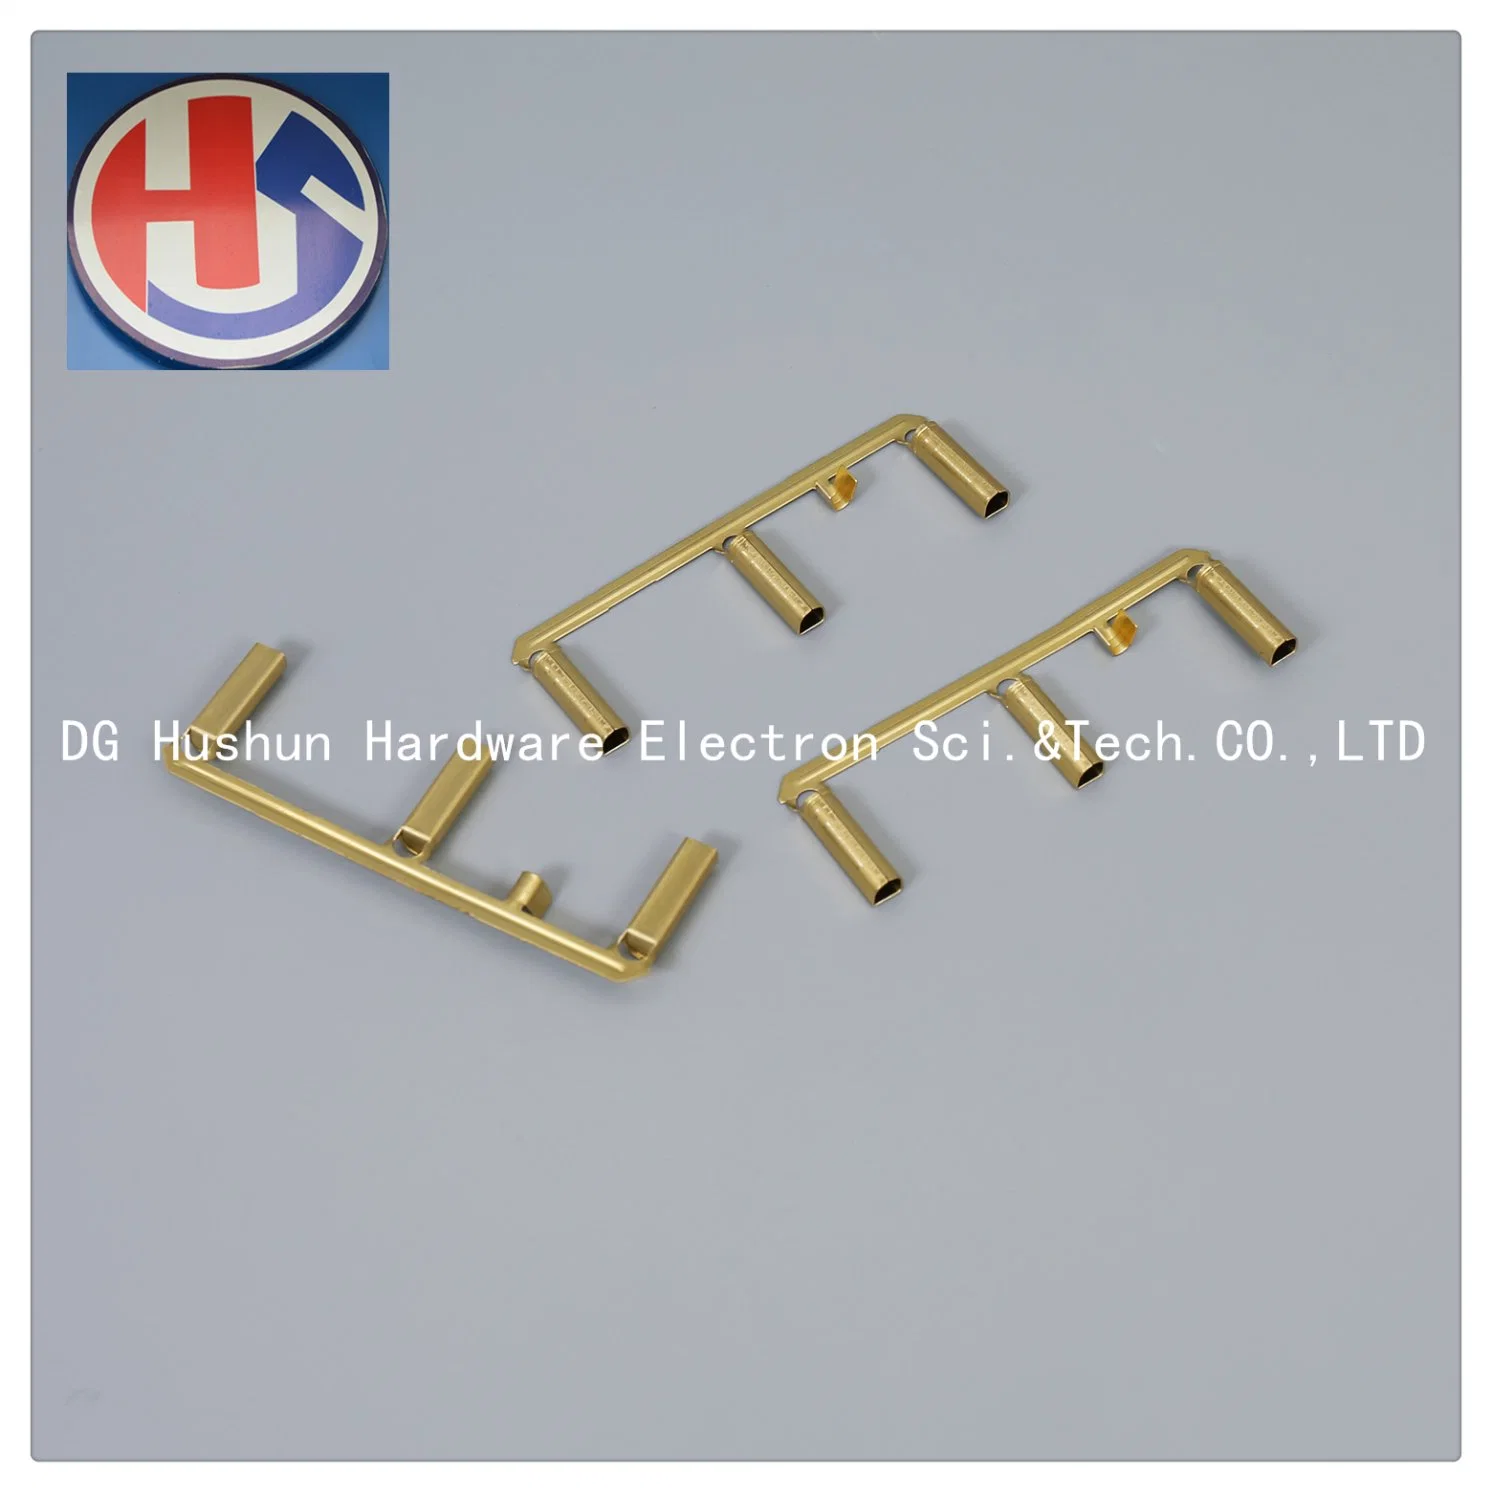 OEM High quality/High cost performance  Brass Terminal, Electric Terminal